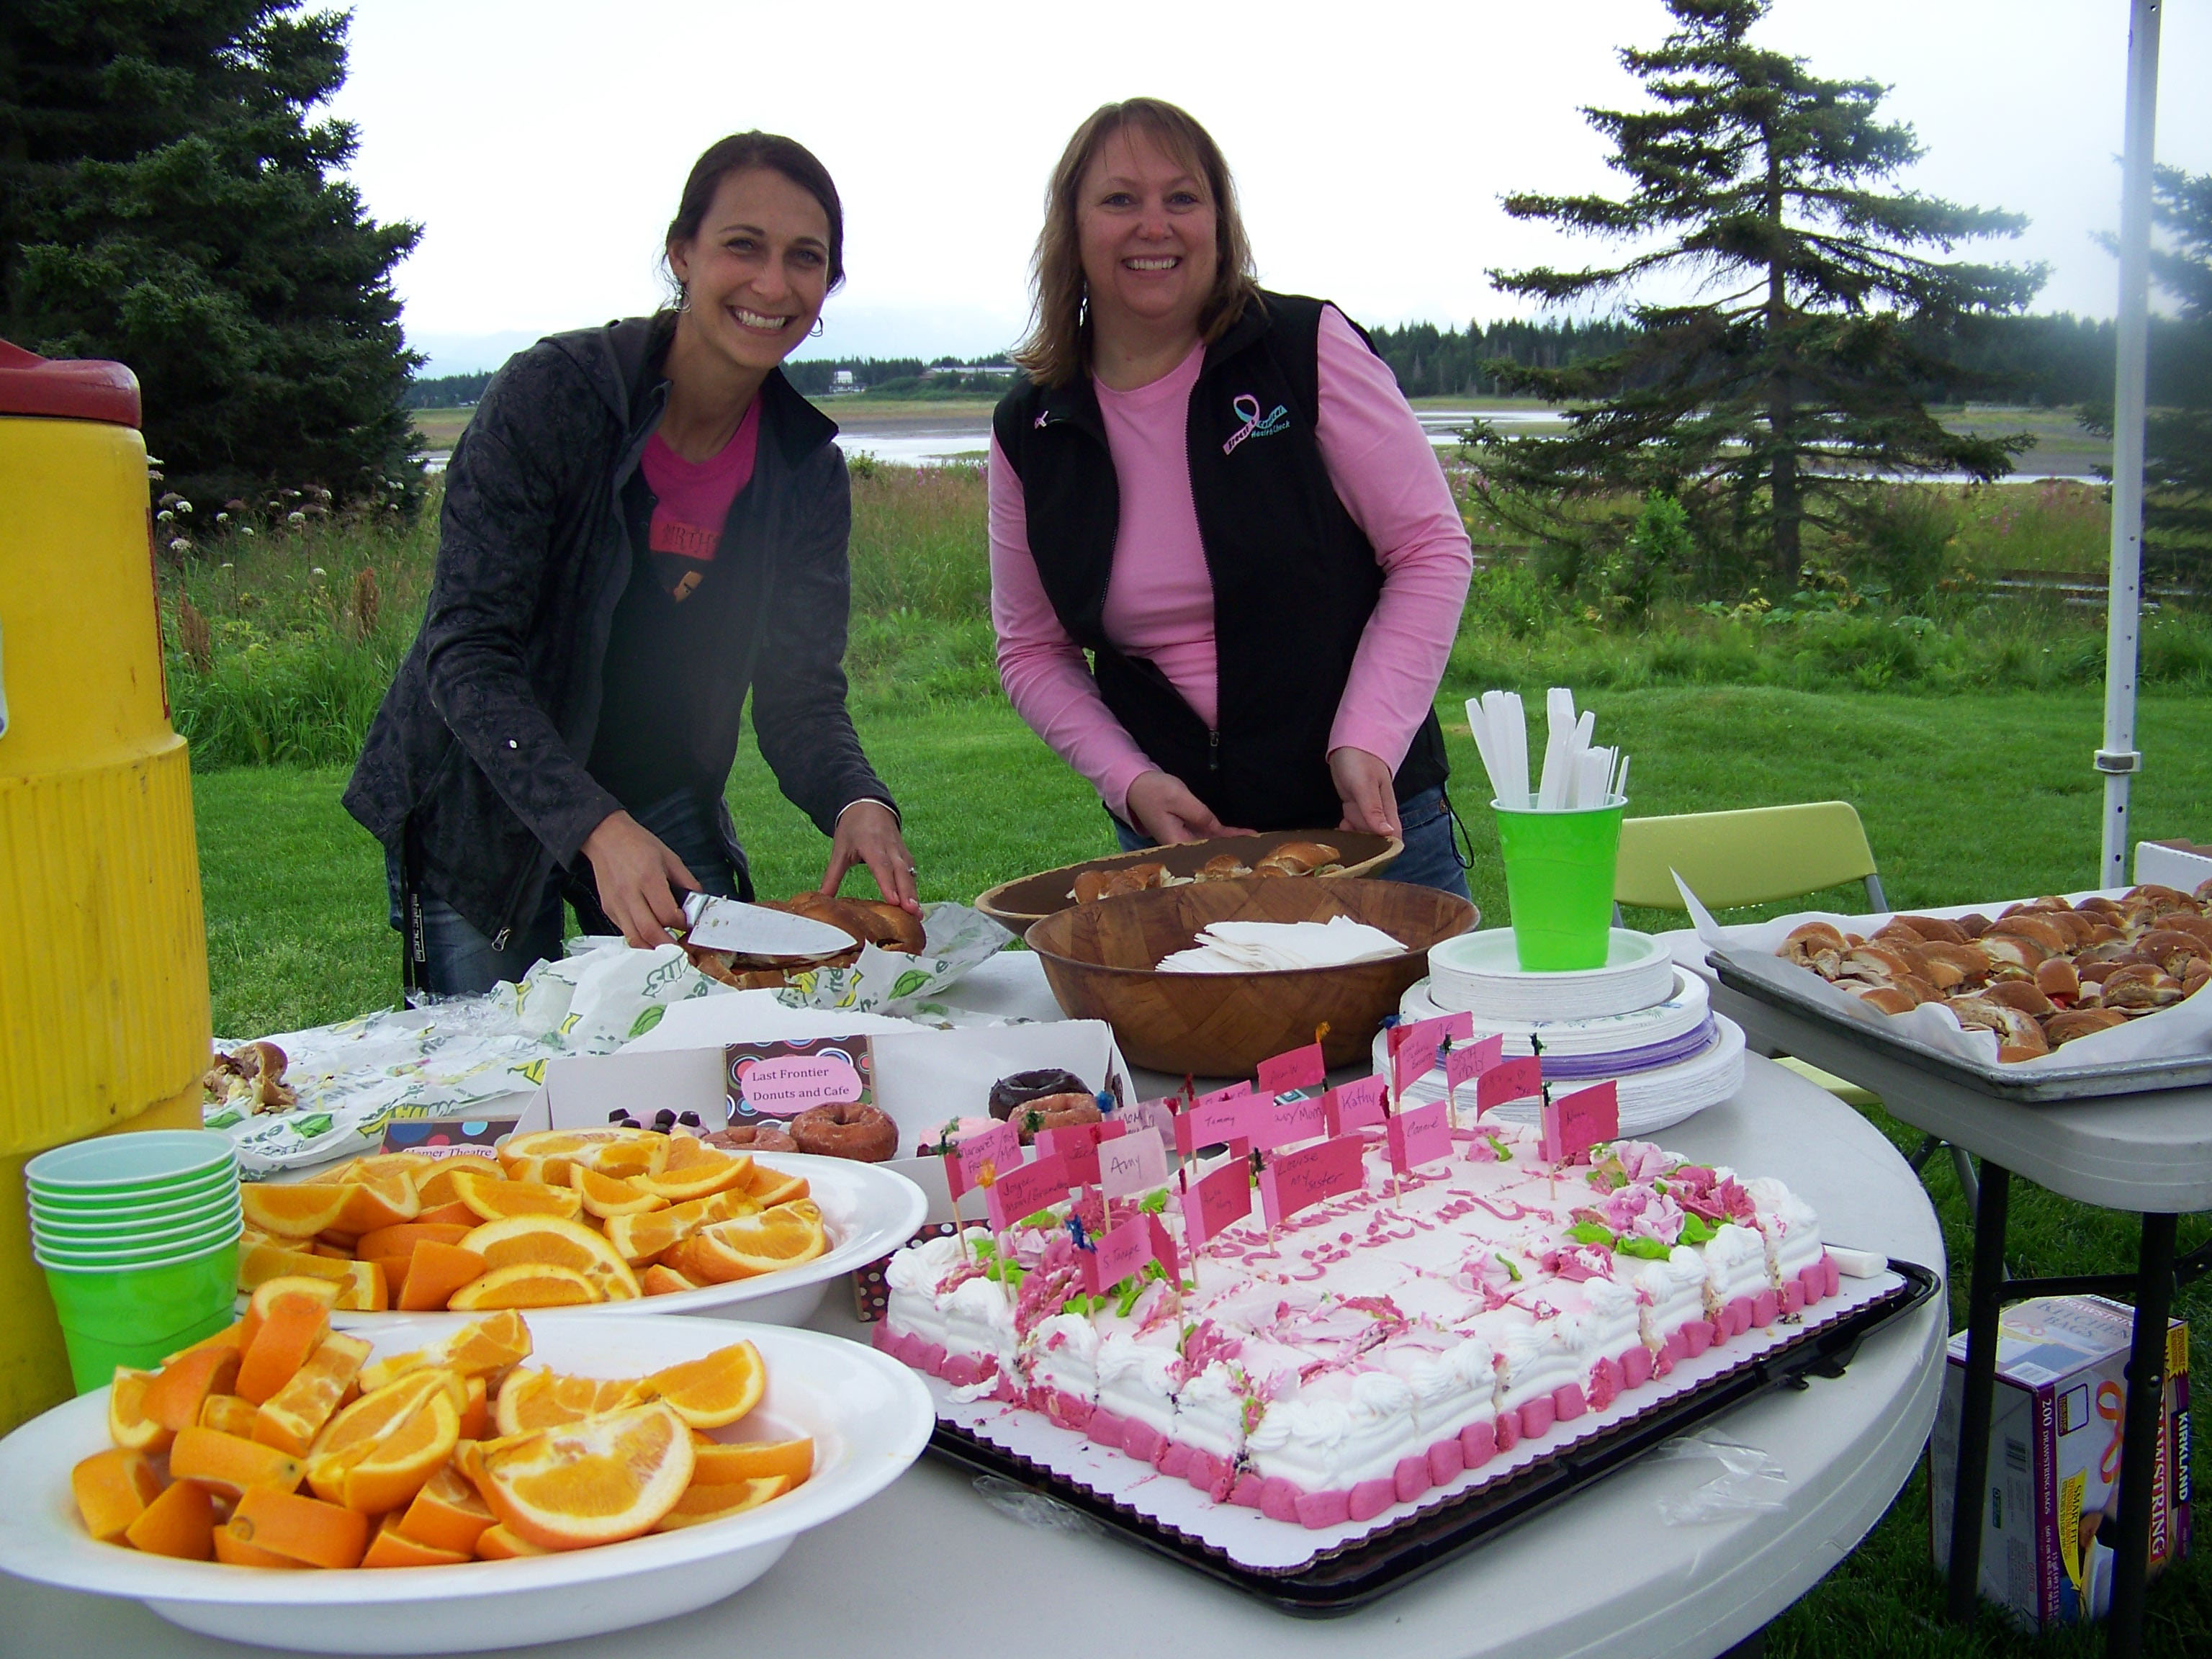 Megan Palma of Kachemak Bay Family Planning Clinic and Bobbi Unger of Breast and Cervical Health Check prepare refreshments for athletes at the end of Sunday's Breast Cancer Run.-Photo by McKibben Jackinsky,  Homer News